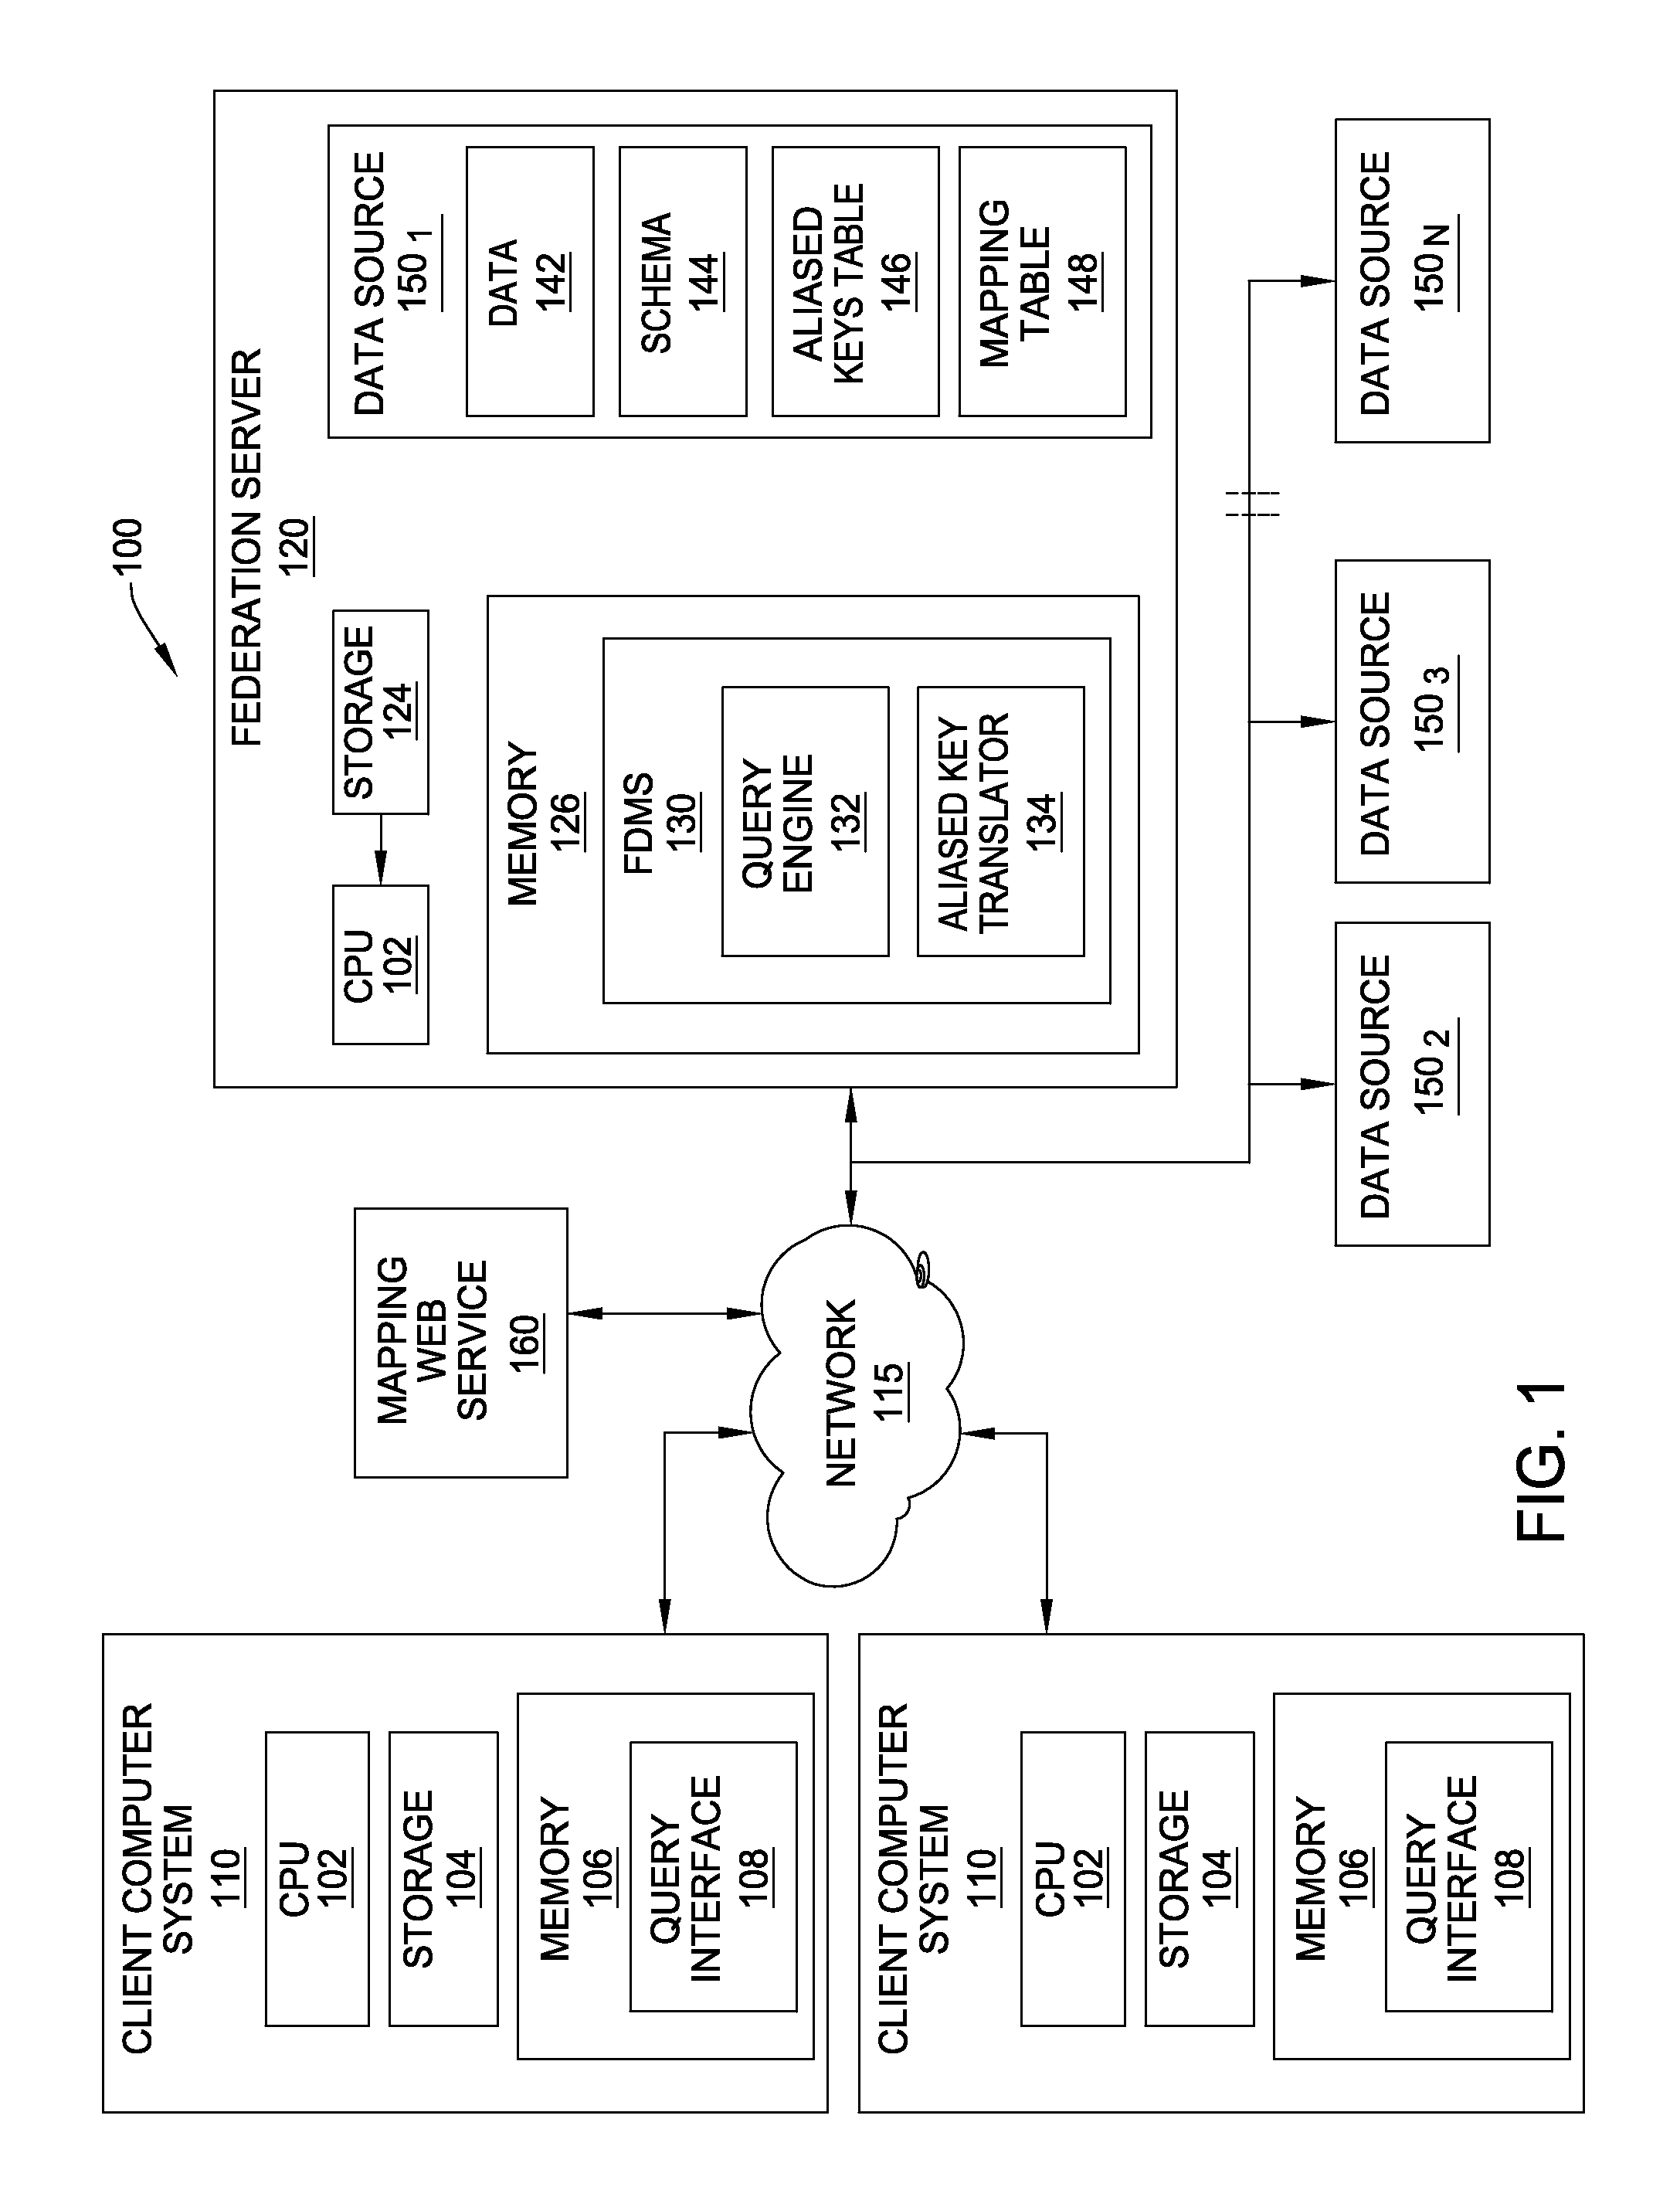 Method for executing federated database queries using aliased keys